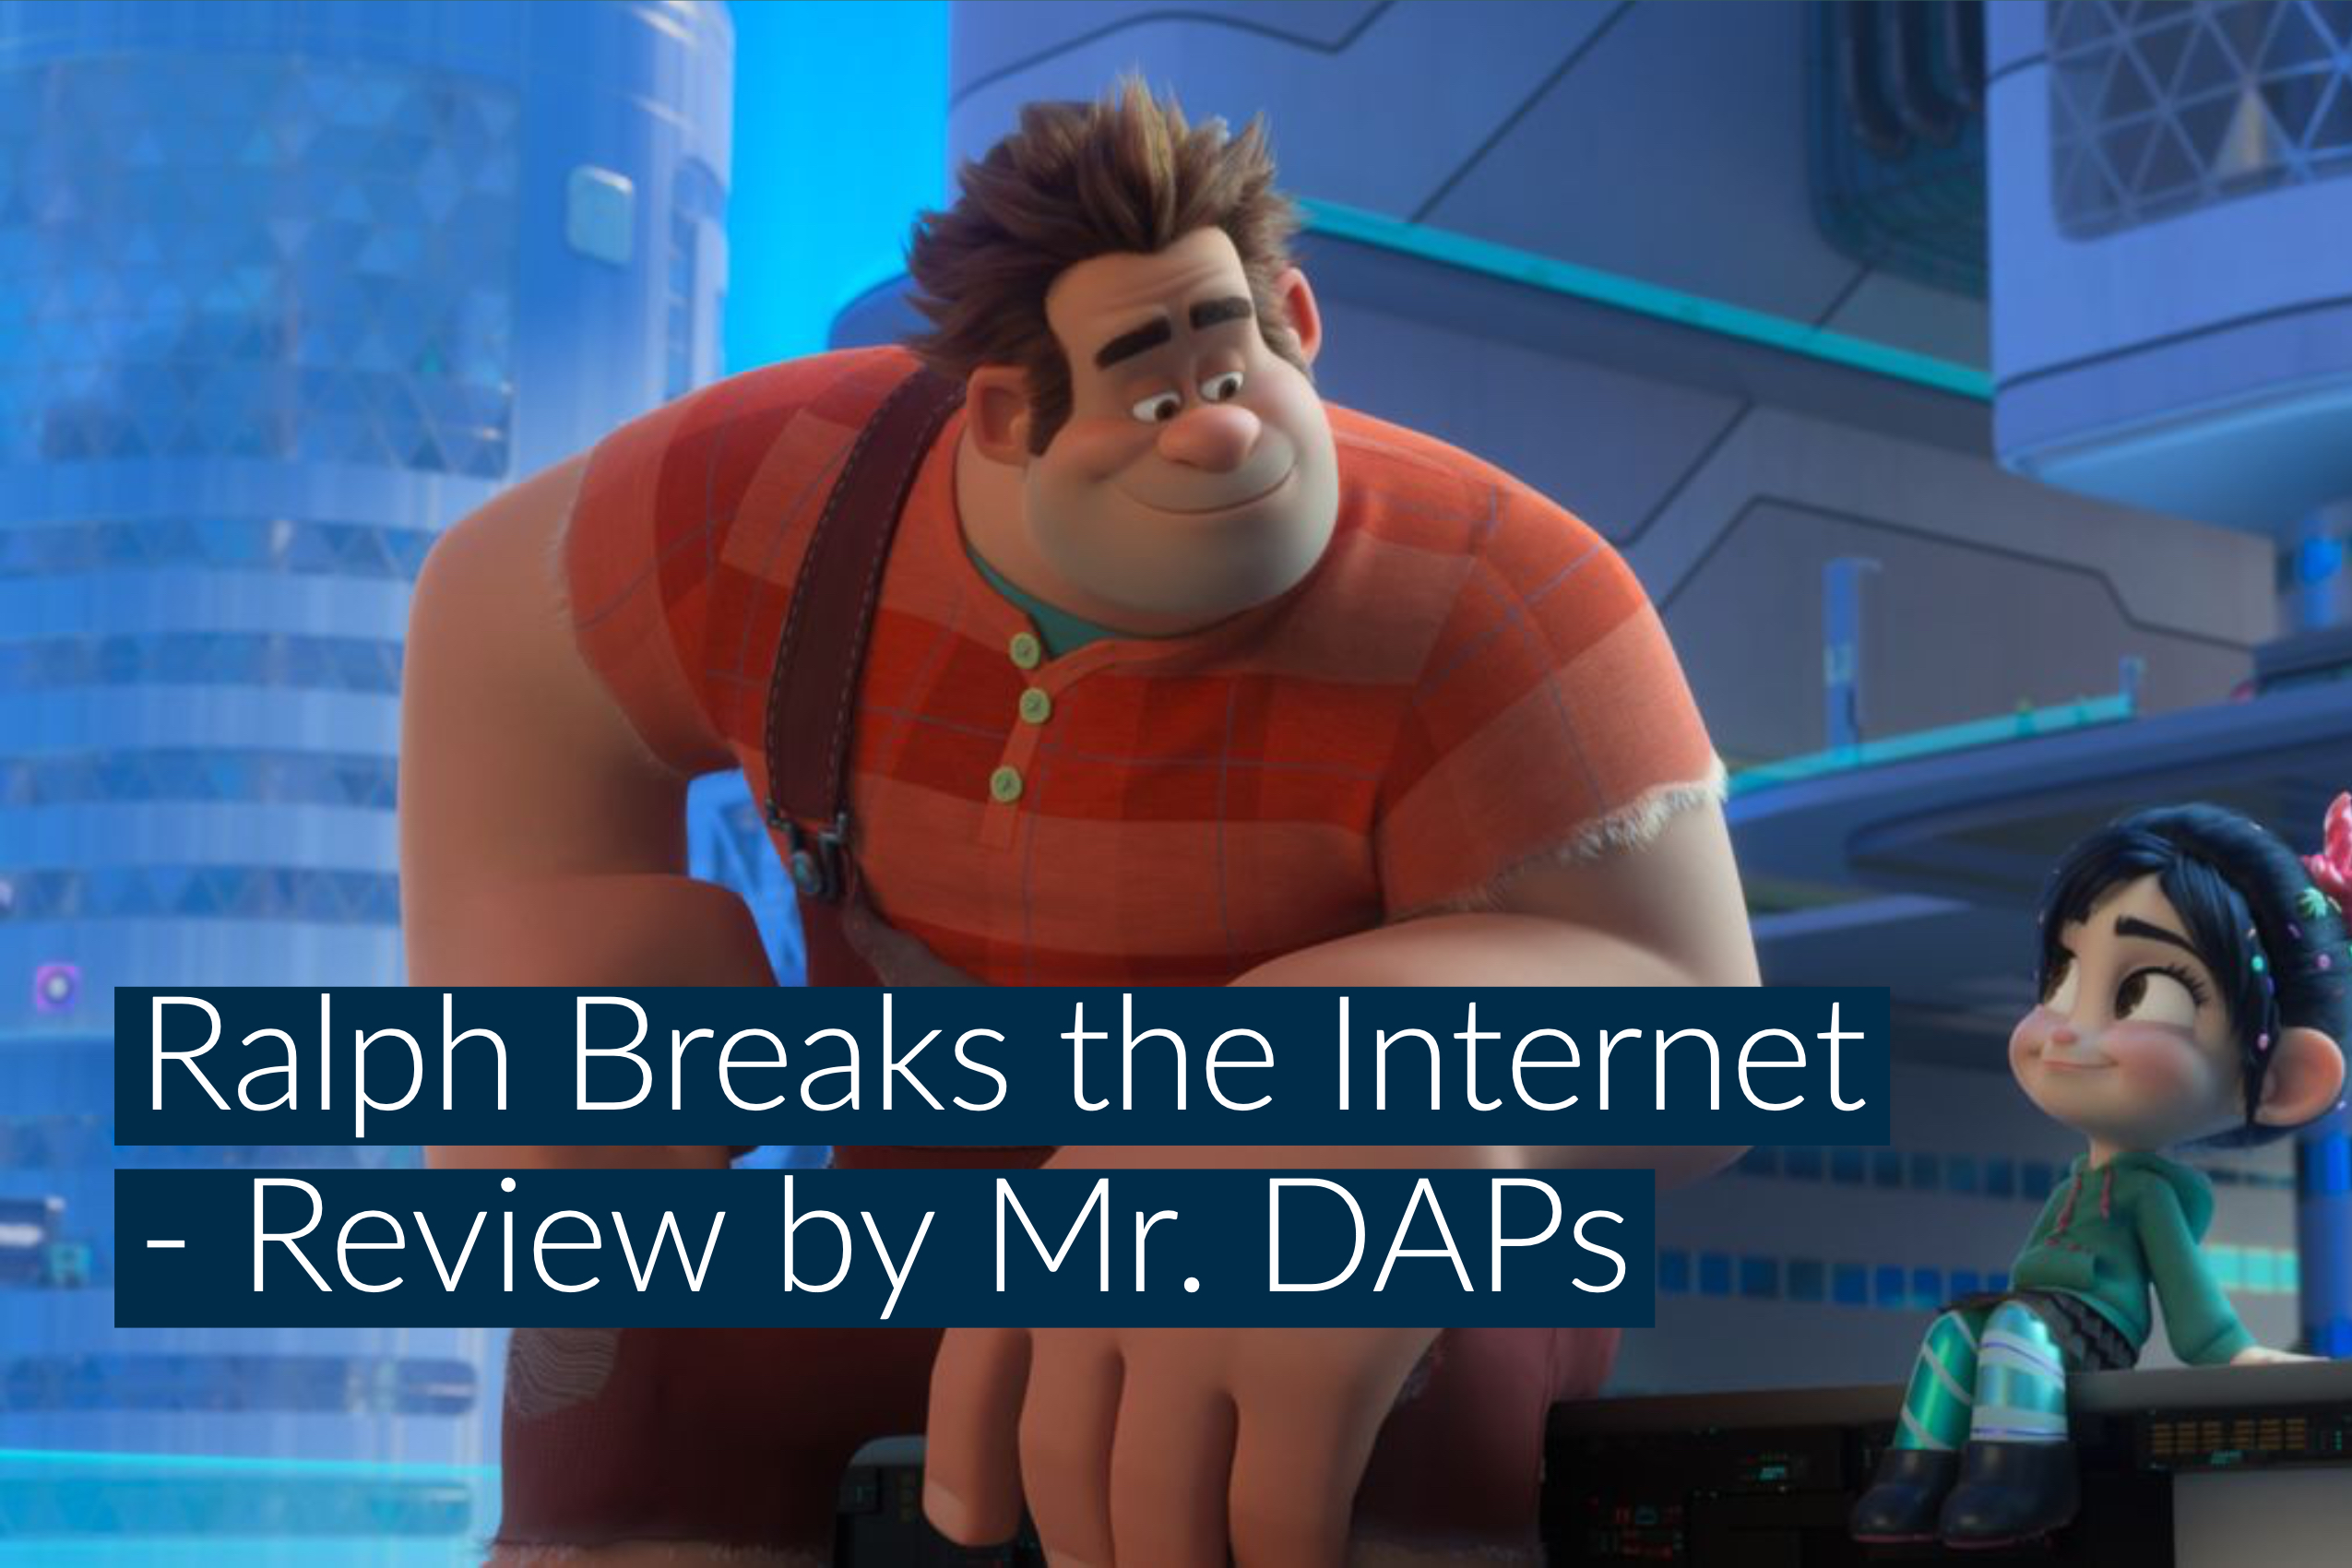 Disney’s Ralph Breaks the Internet – A Heartwarming Tale of Friendship and Dreams – Review by Mr. DAPs